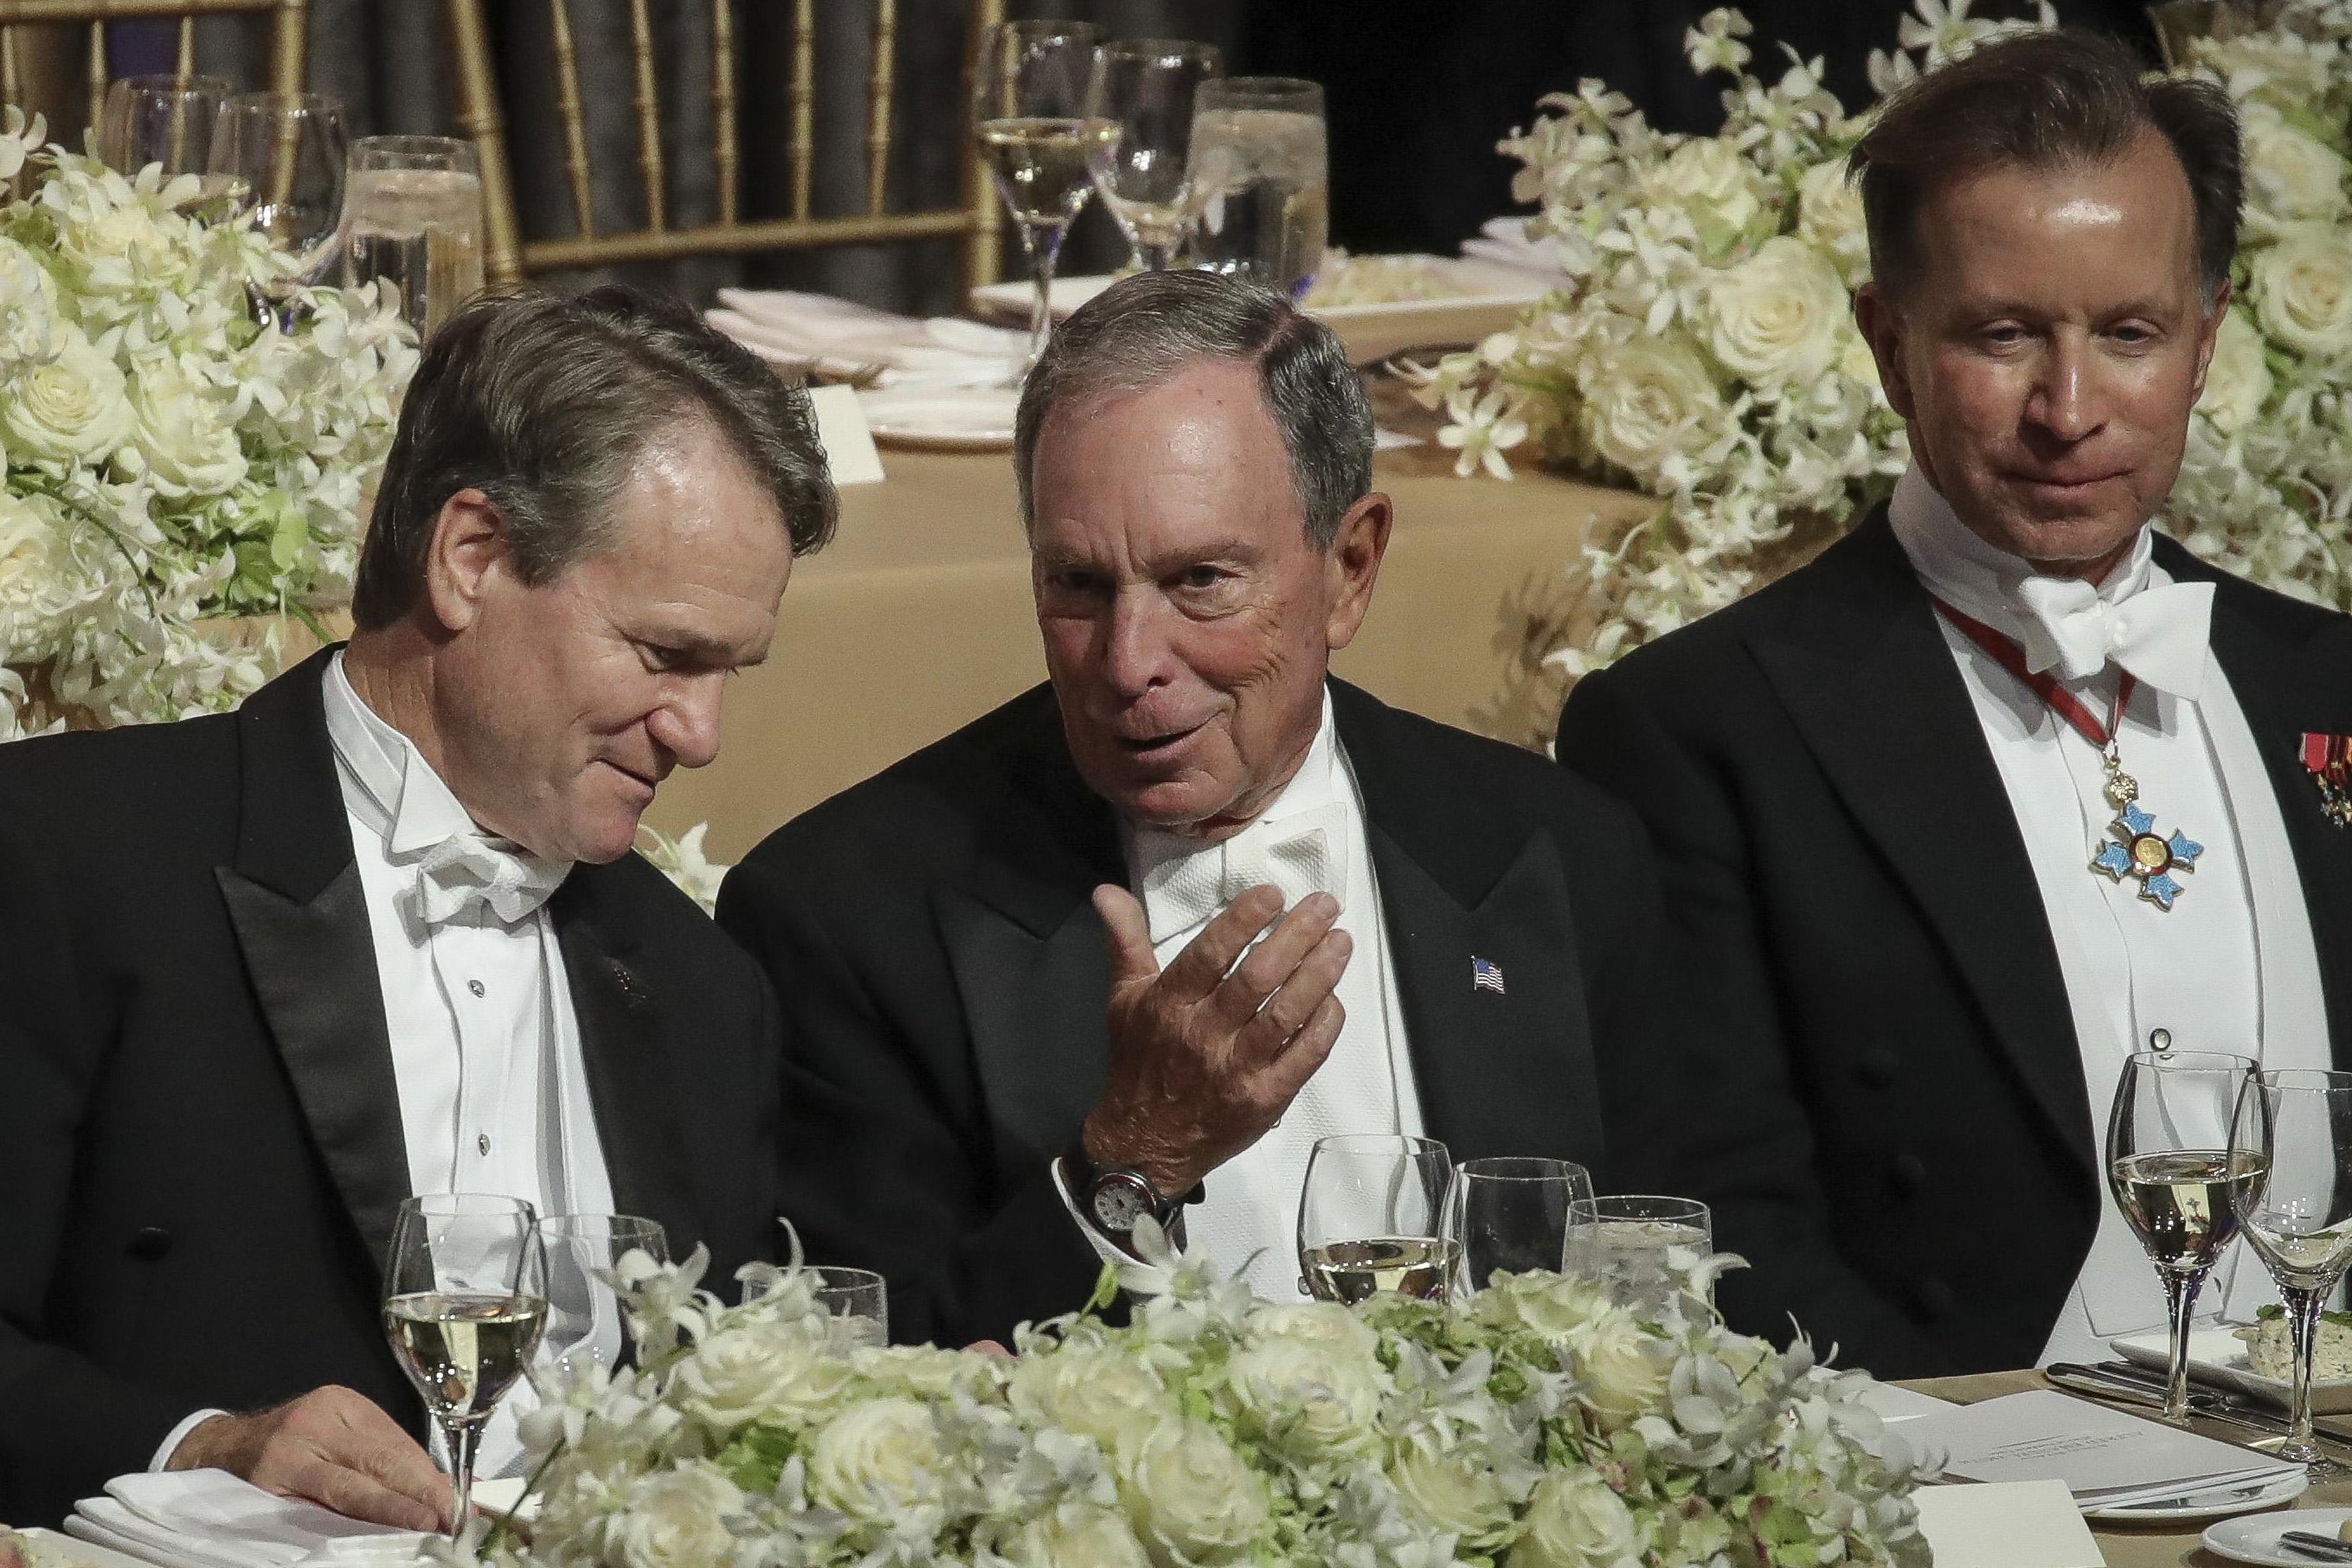 Michael Bloomberg, wearing white tie formal wear, talks at a banquet table